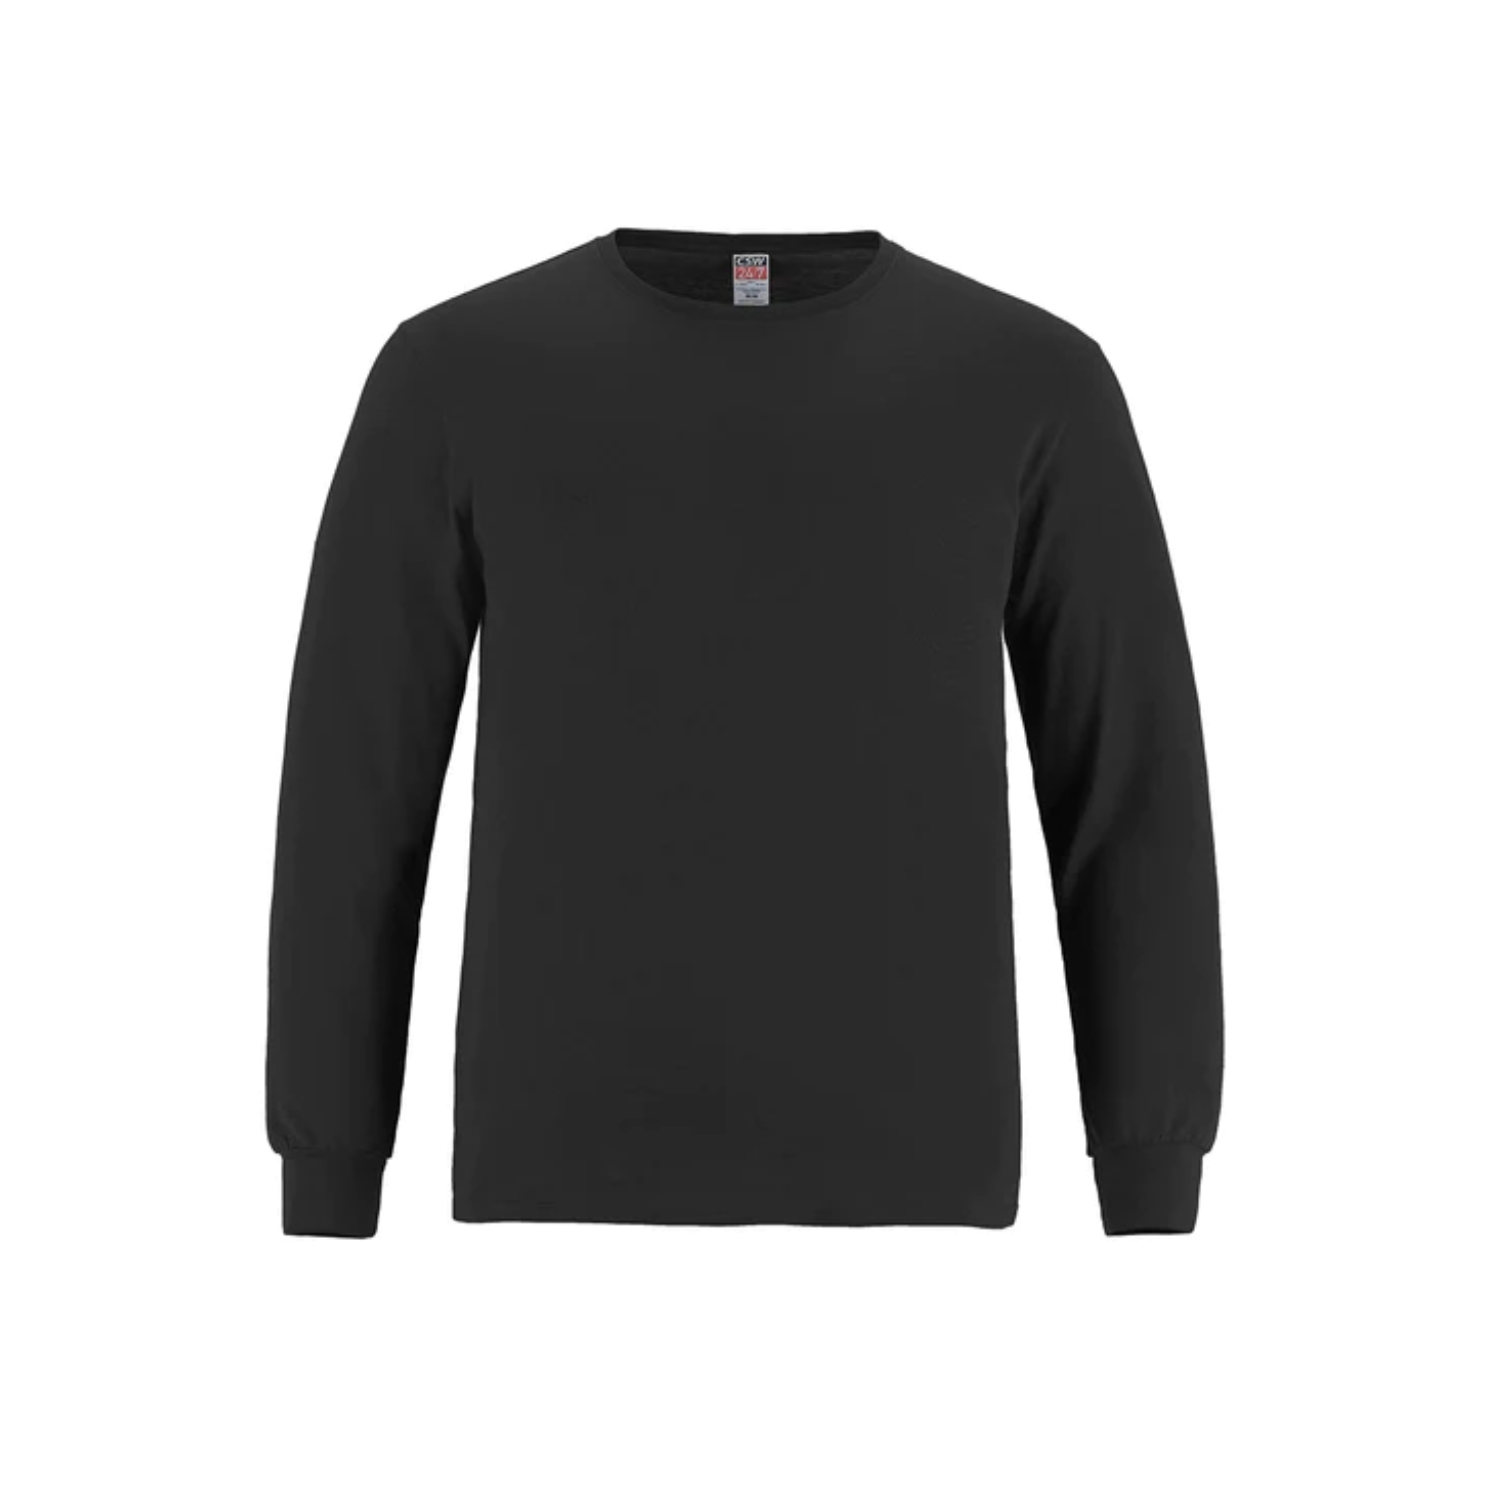 S5615Y - Breeze - Youth Long Sleeve Crewneck Ring Spun Combed Cotton Tee